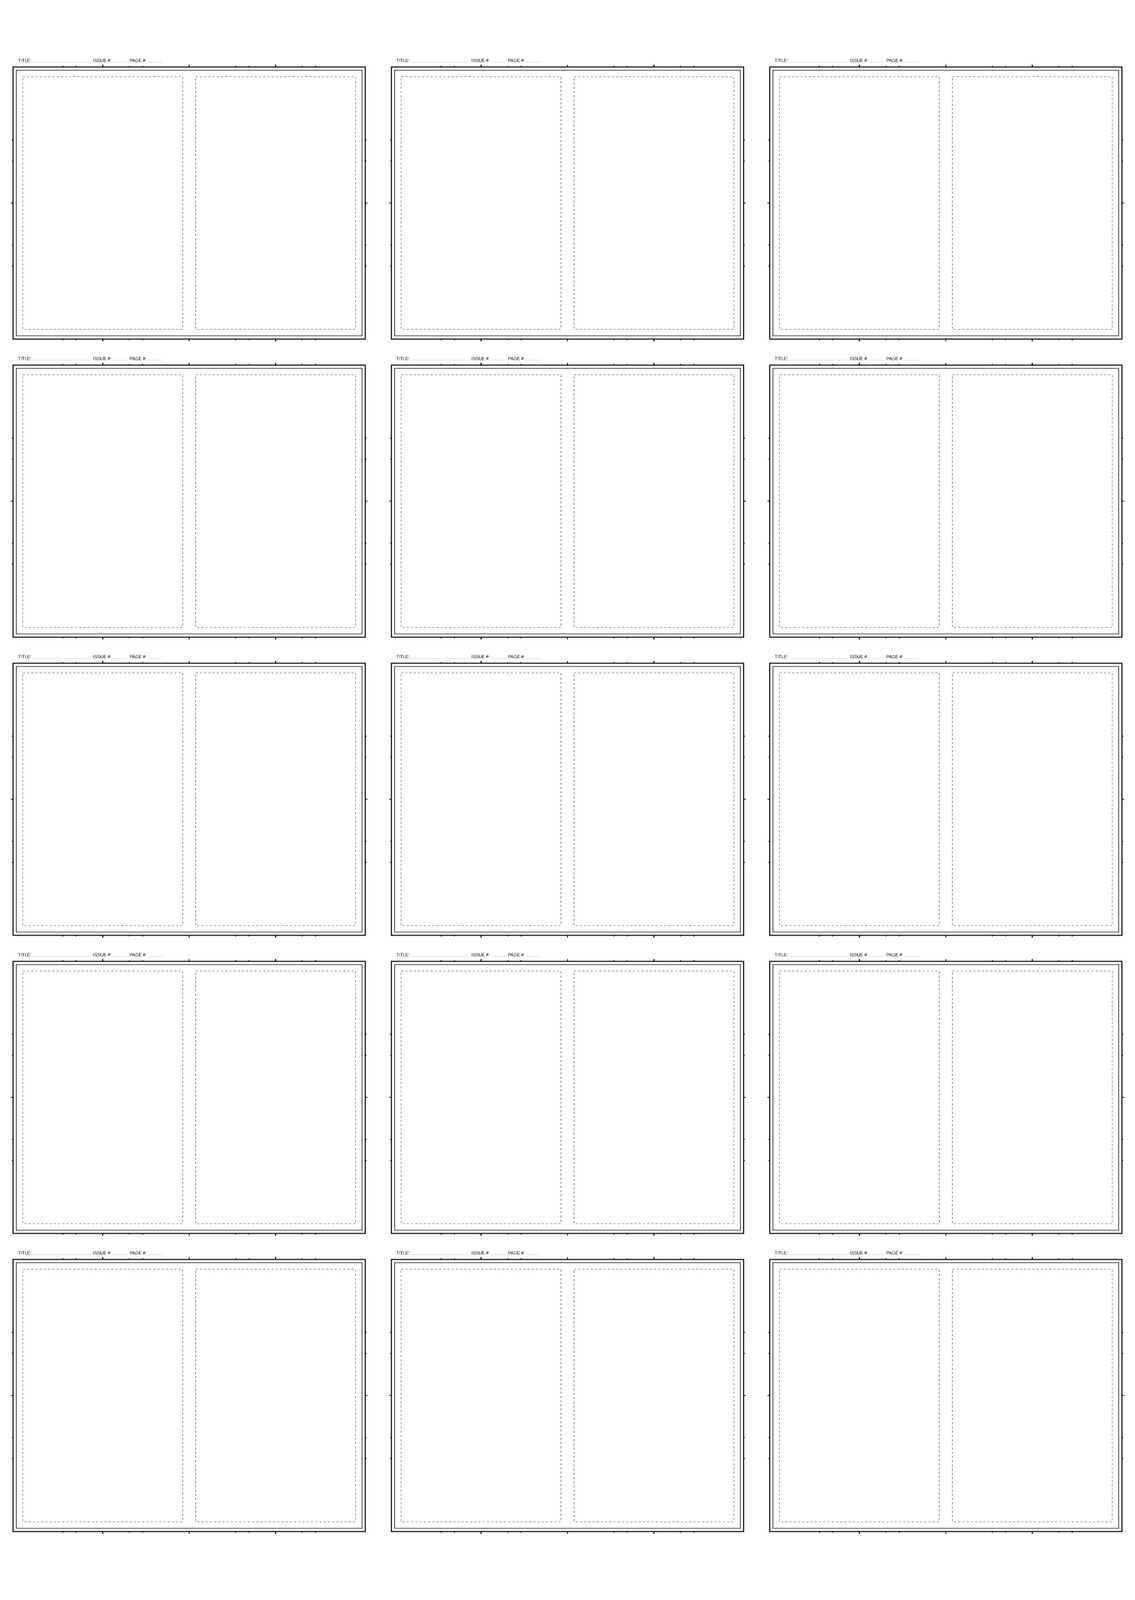 thumbnails - american comic double page template (DIN A4)